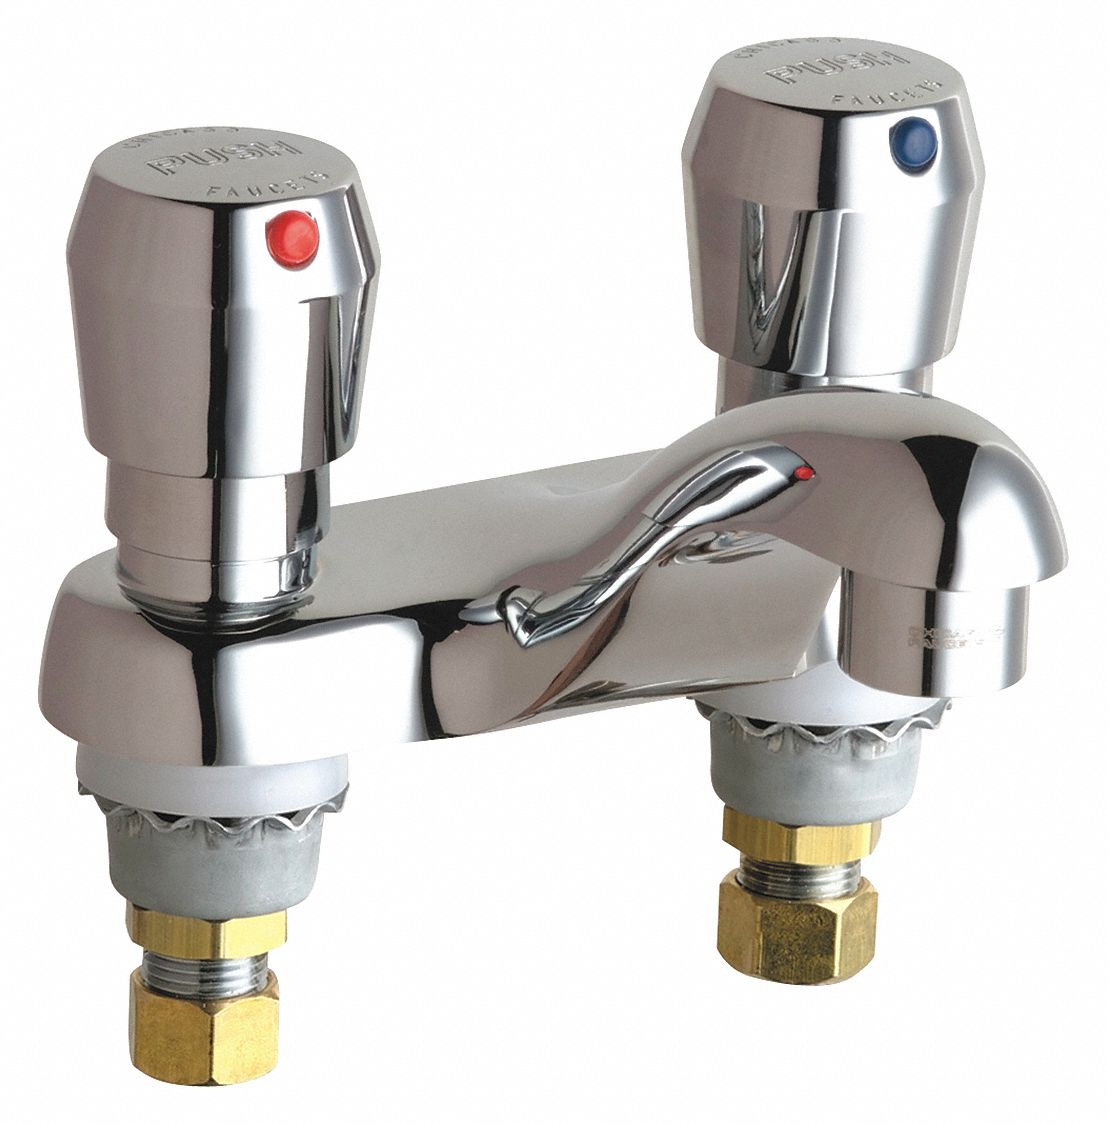 CHICAGO FAUCETS 802-317ABCP Low Arc,Chrome,Chicago Faucets,802 